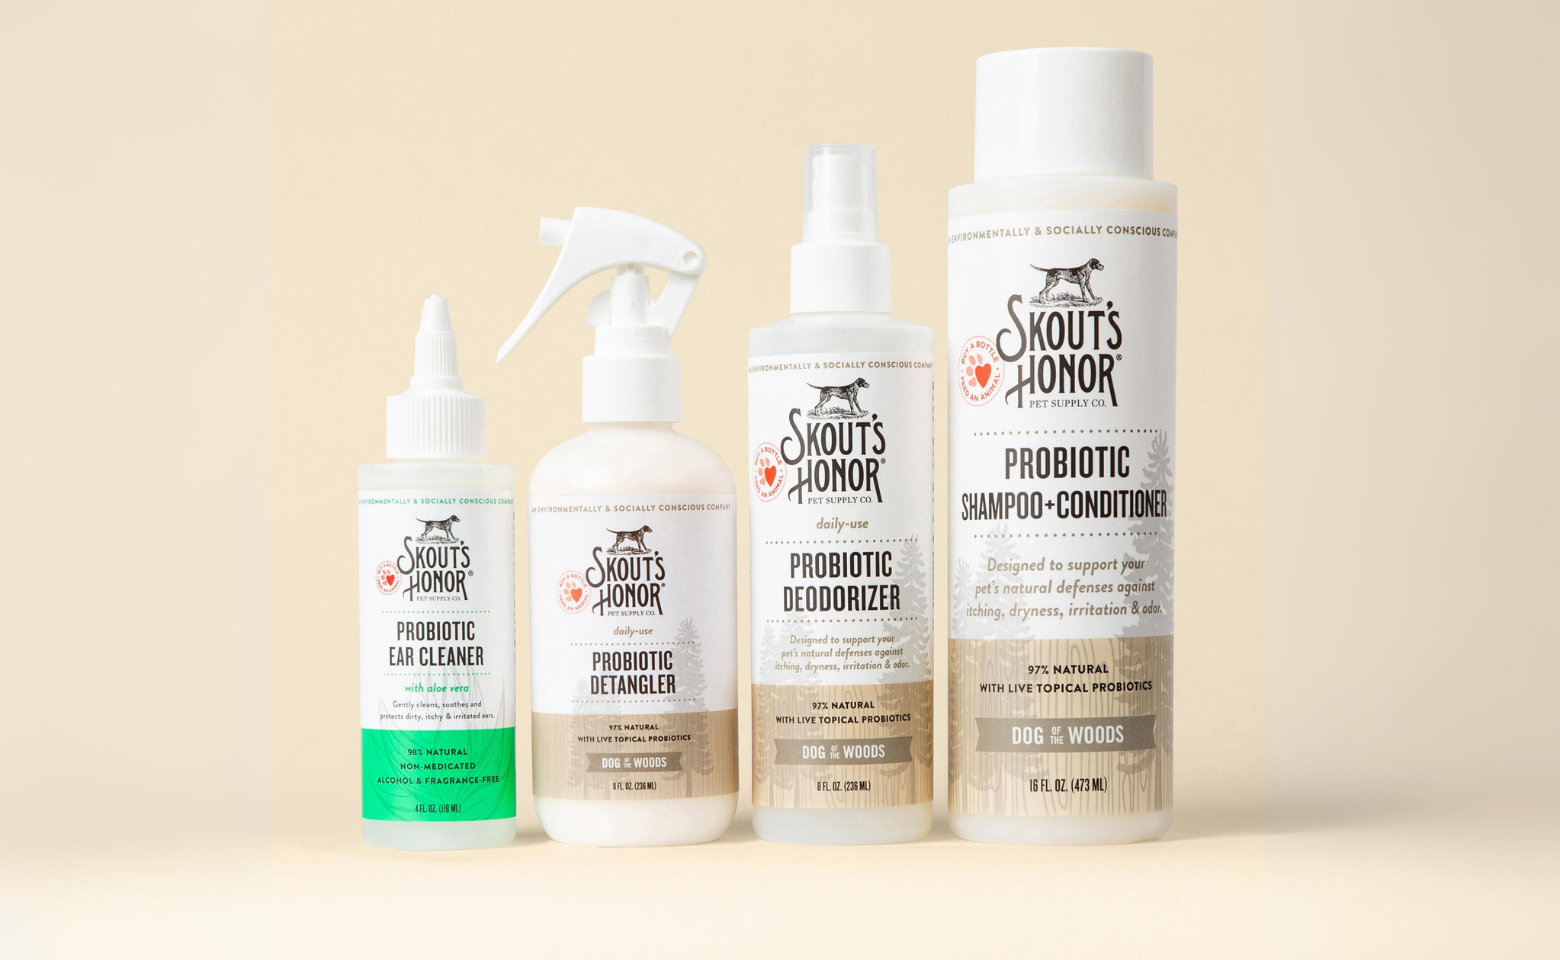 Skout's Honor Probiotic Grooming Bundle in Dog of the Woods scent